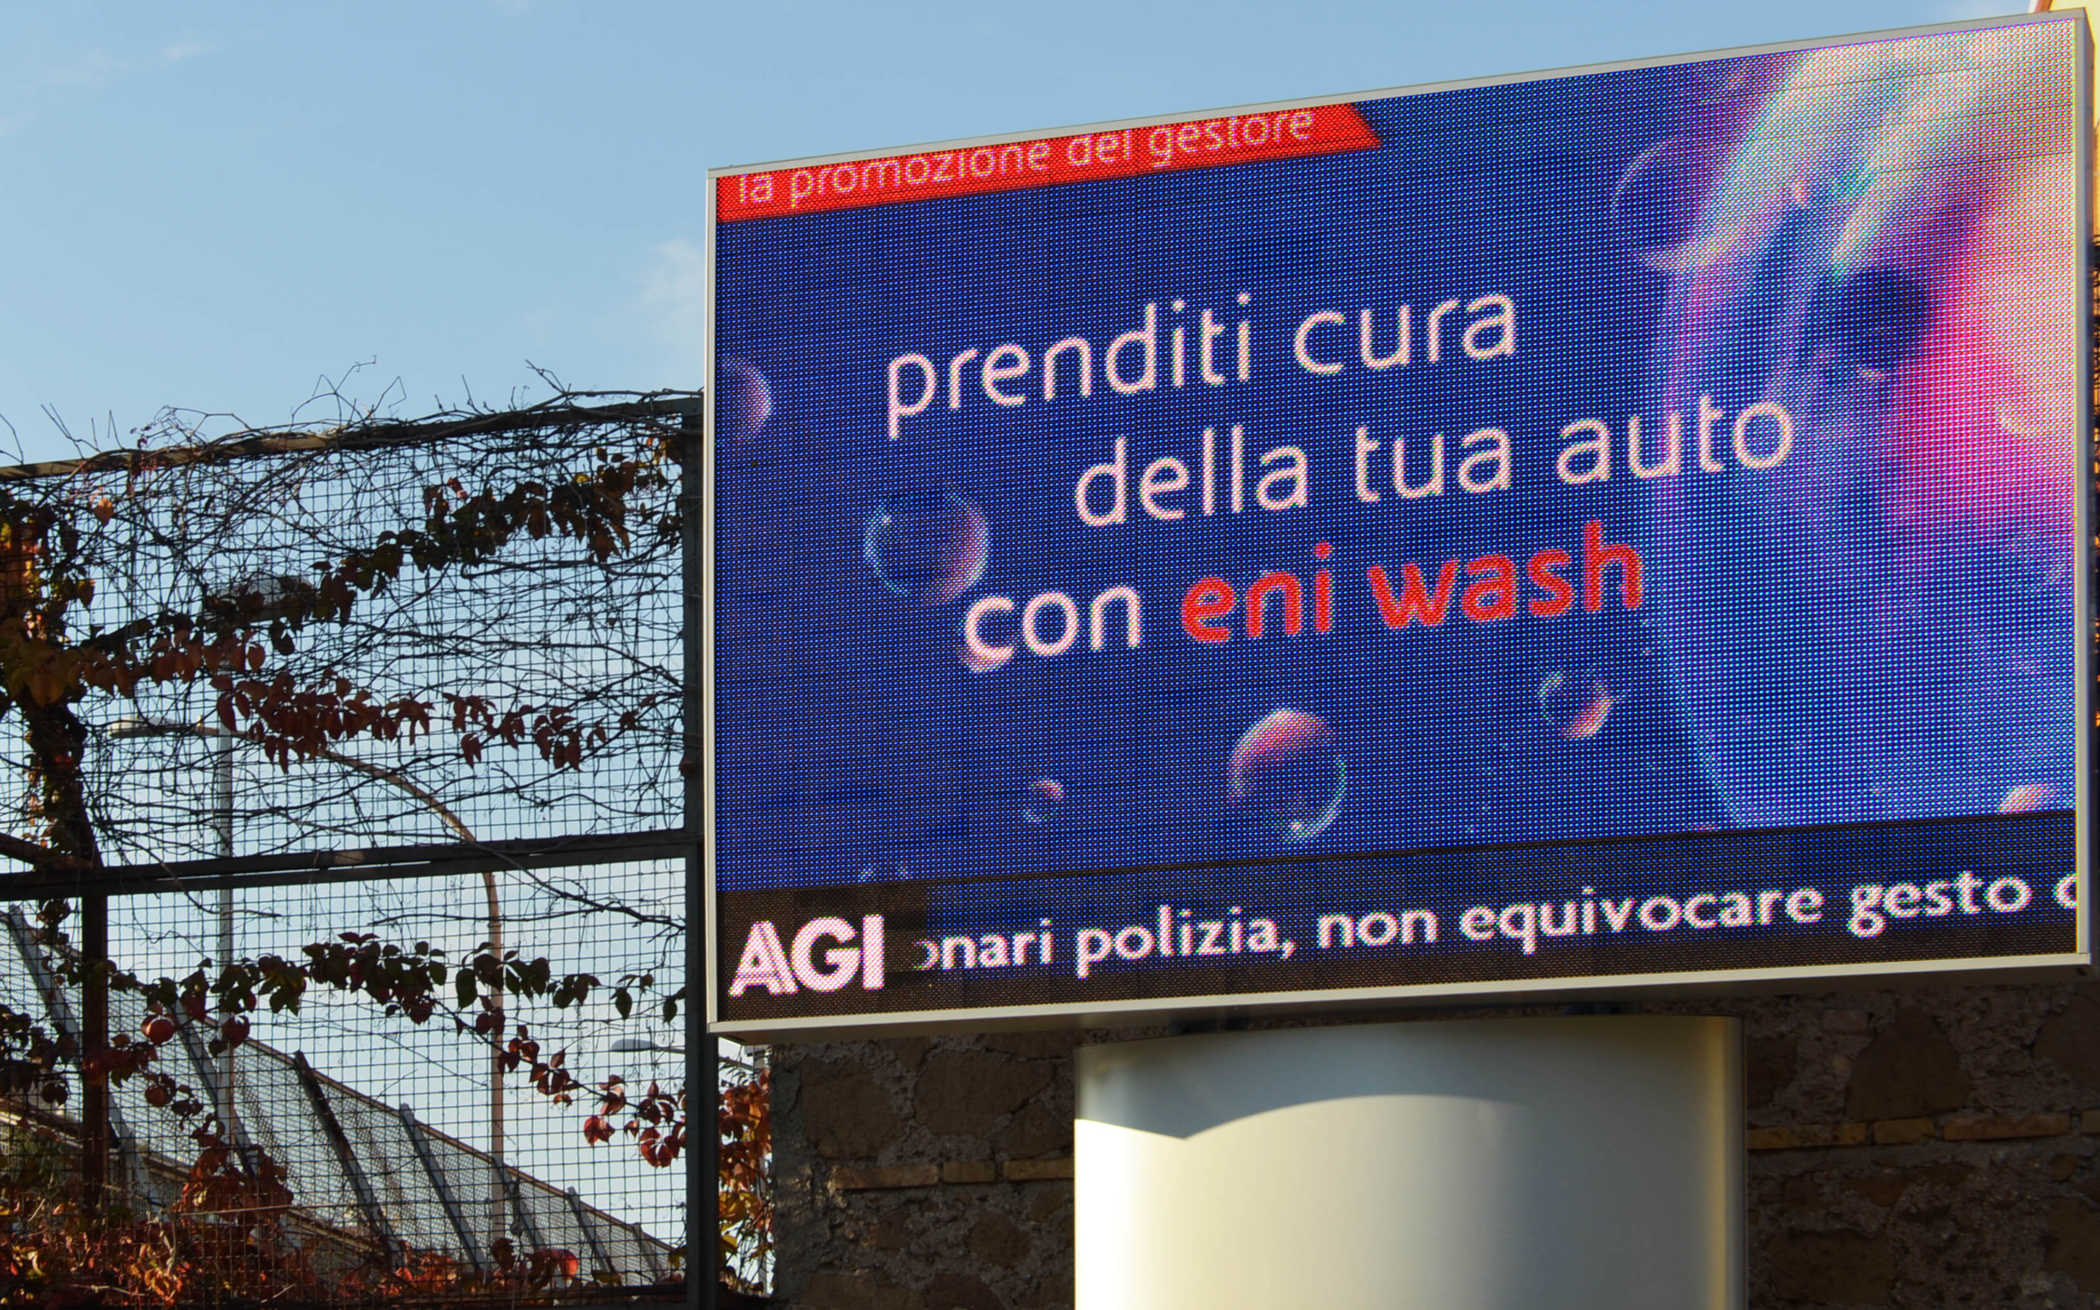 project carried out on behalf of AD Comunicazione